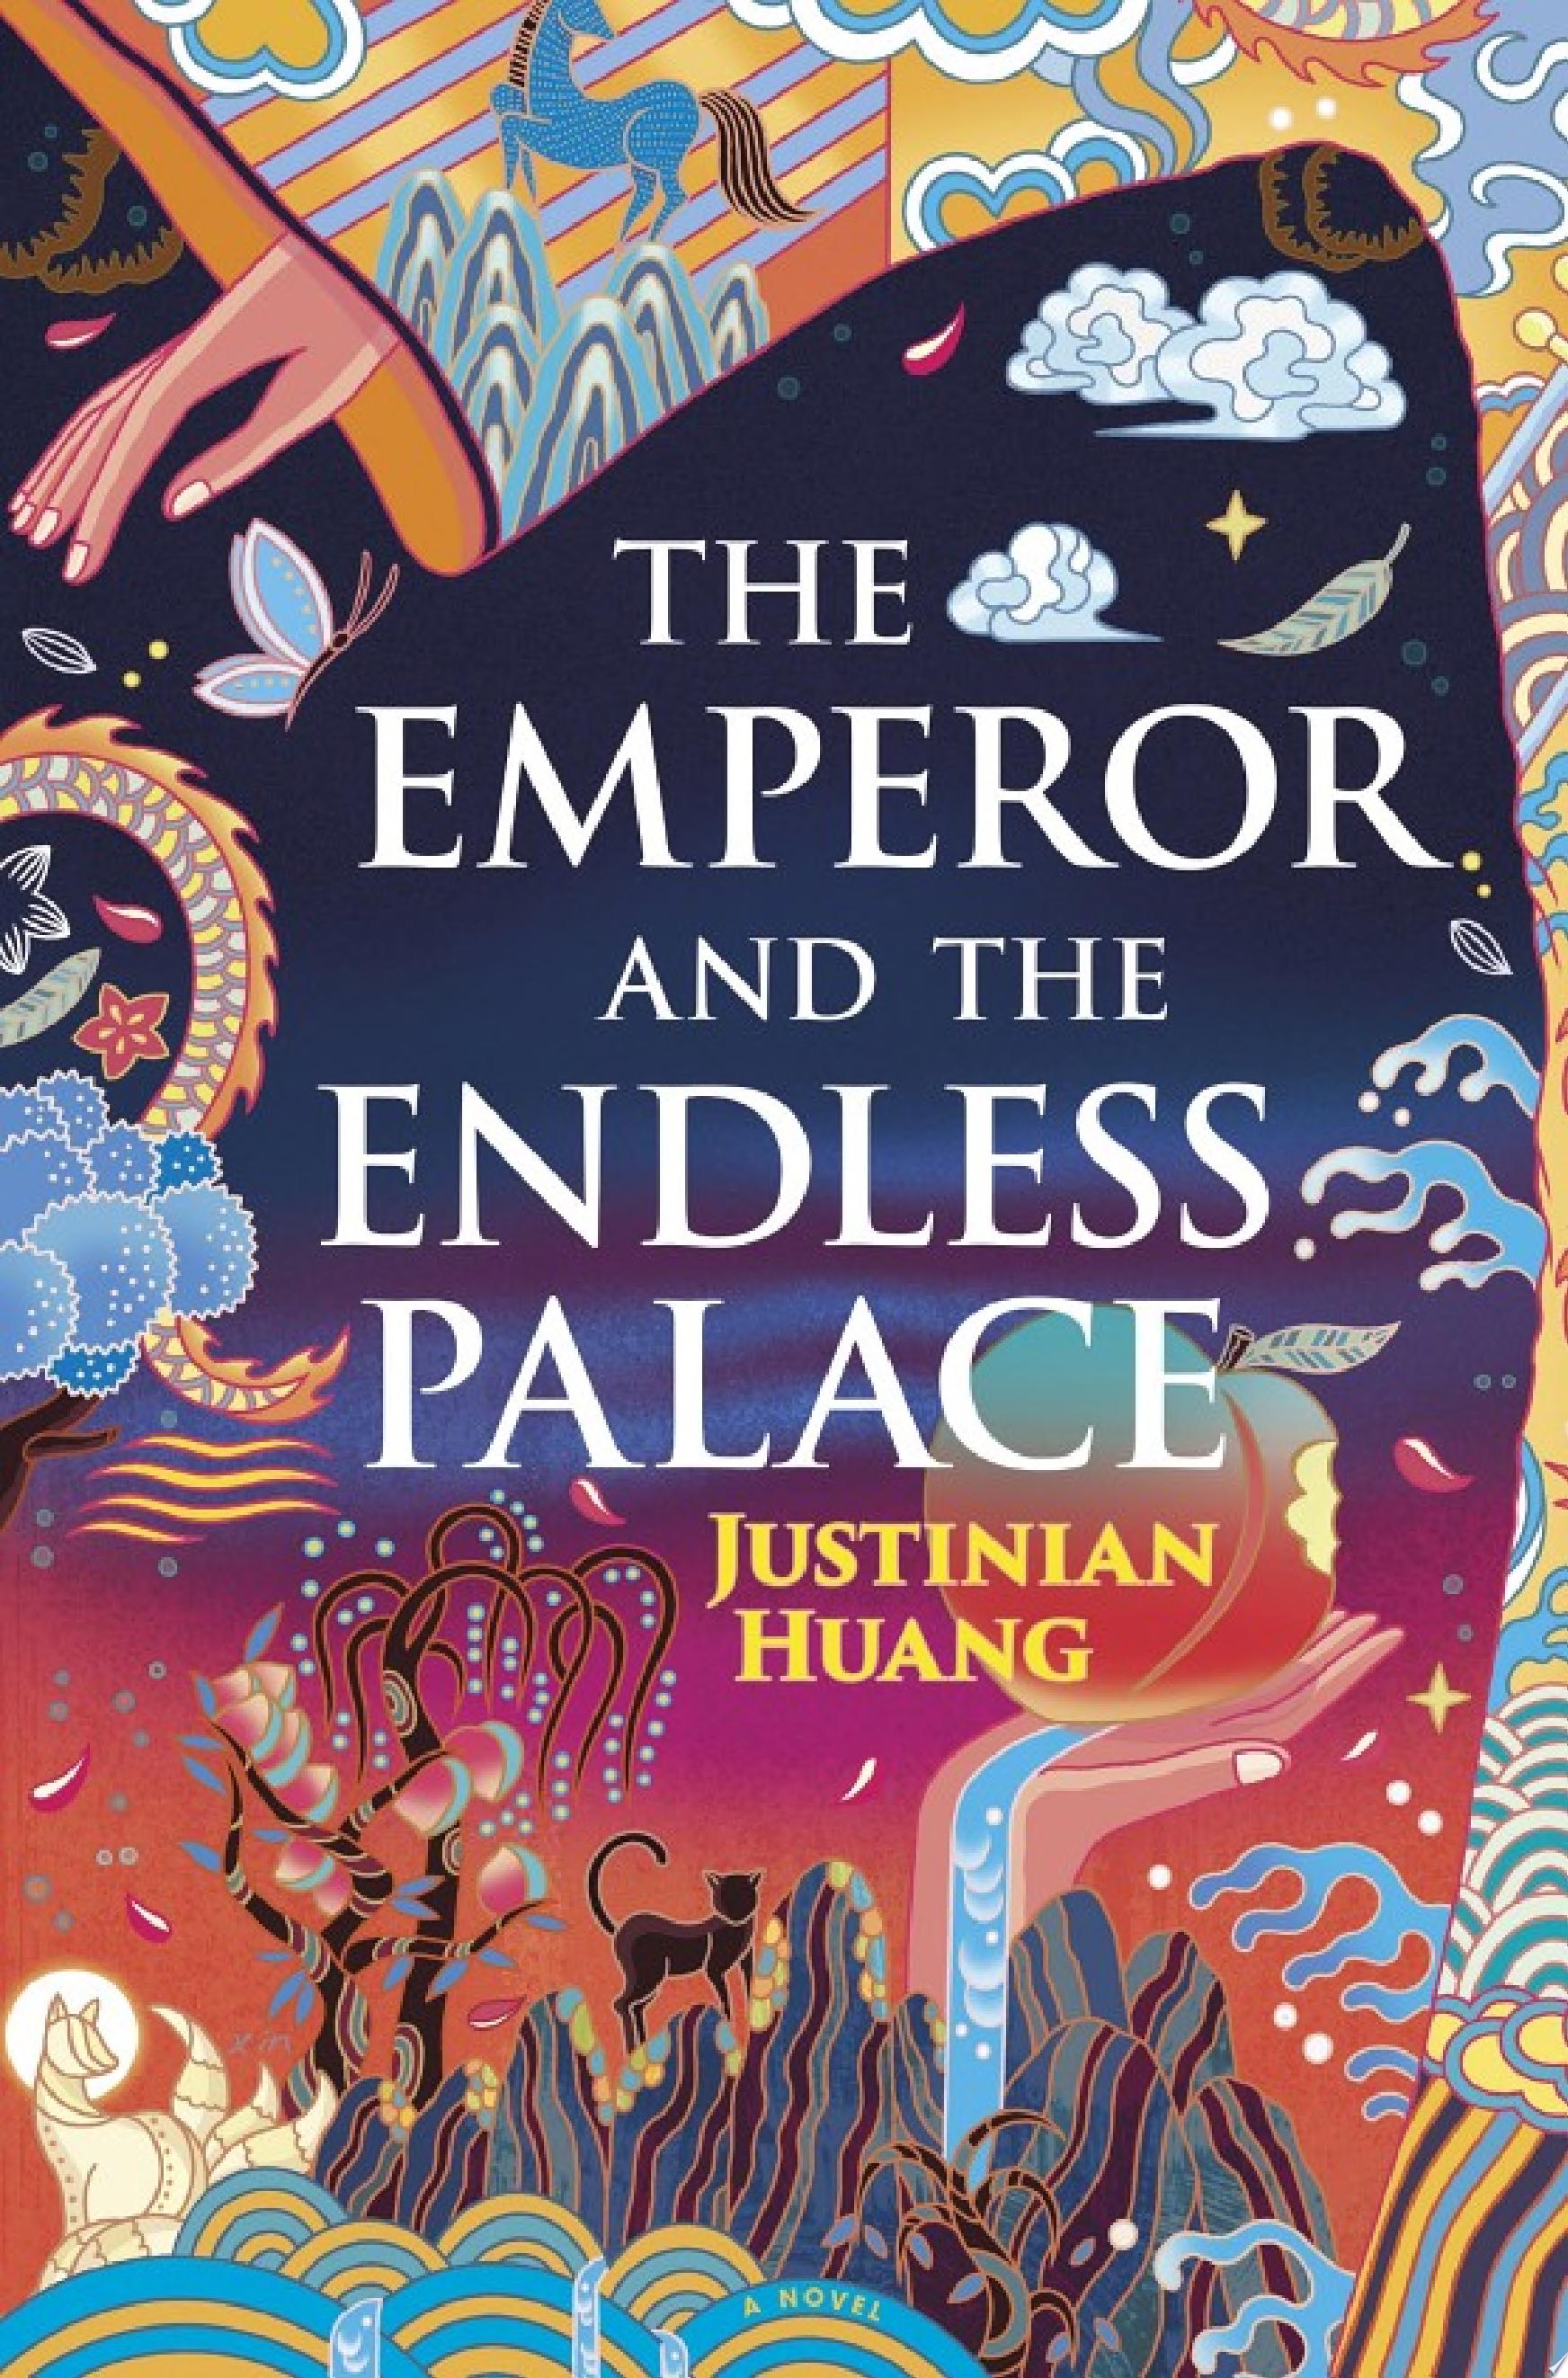 Image for "The Emperor and the Endless Palace"